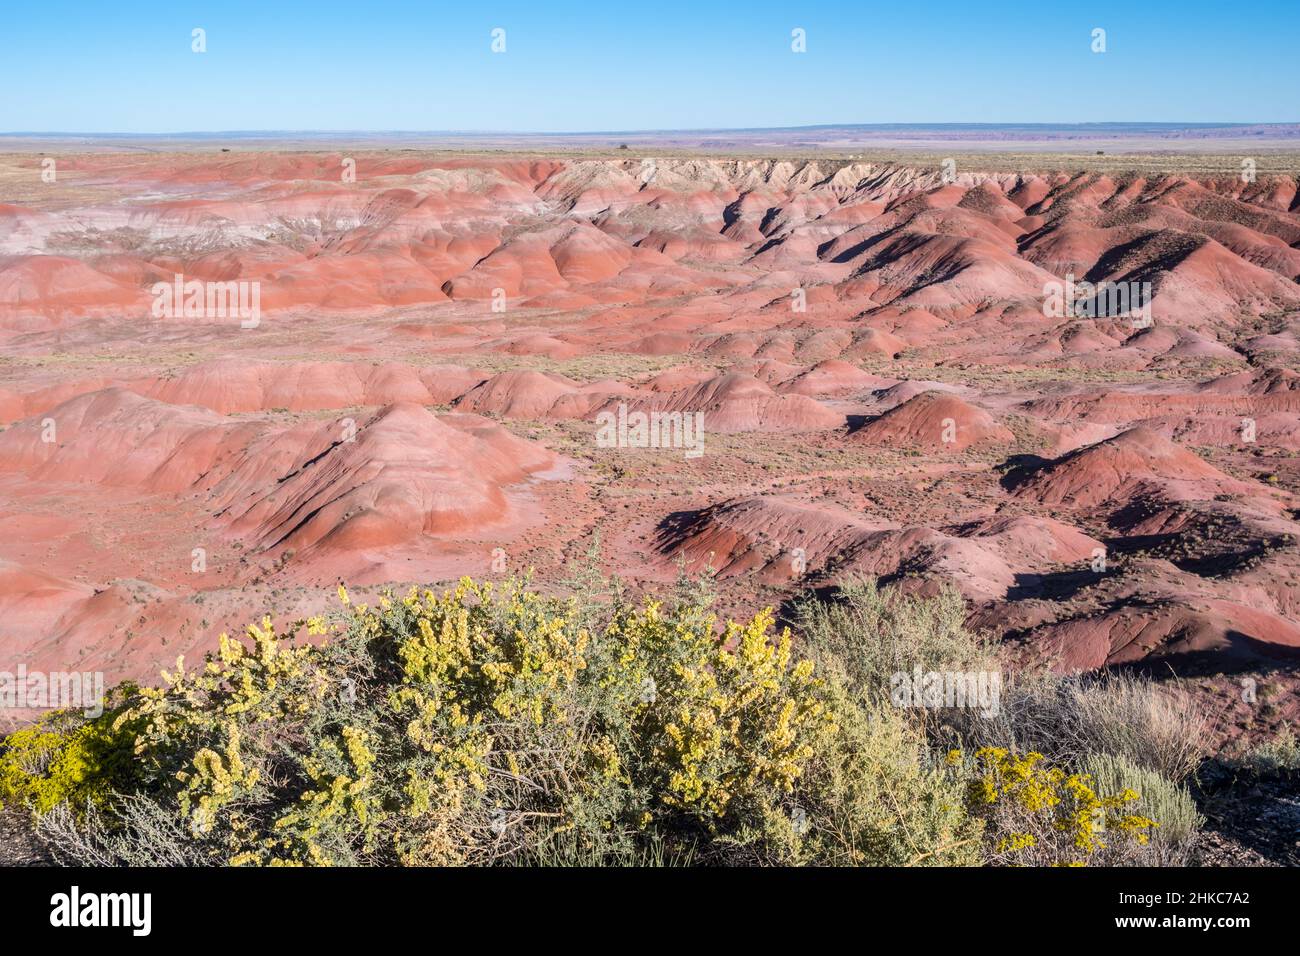 The Rim Trail in Petrified Forest National Park, Arizona Stock Photo